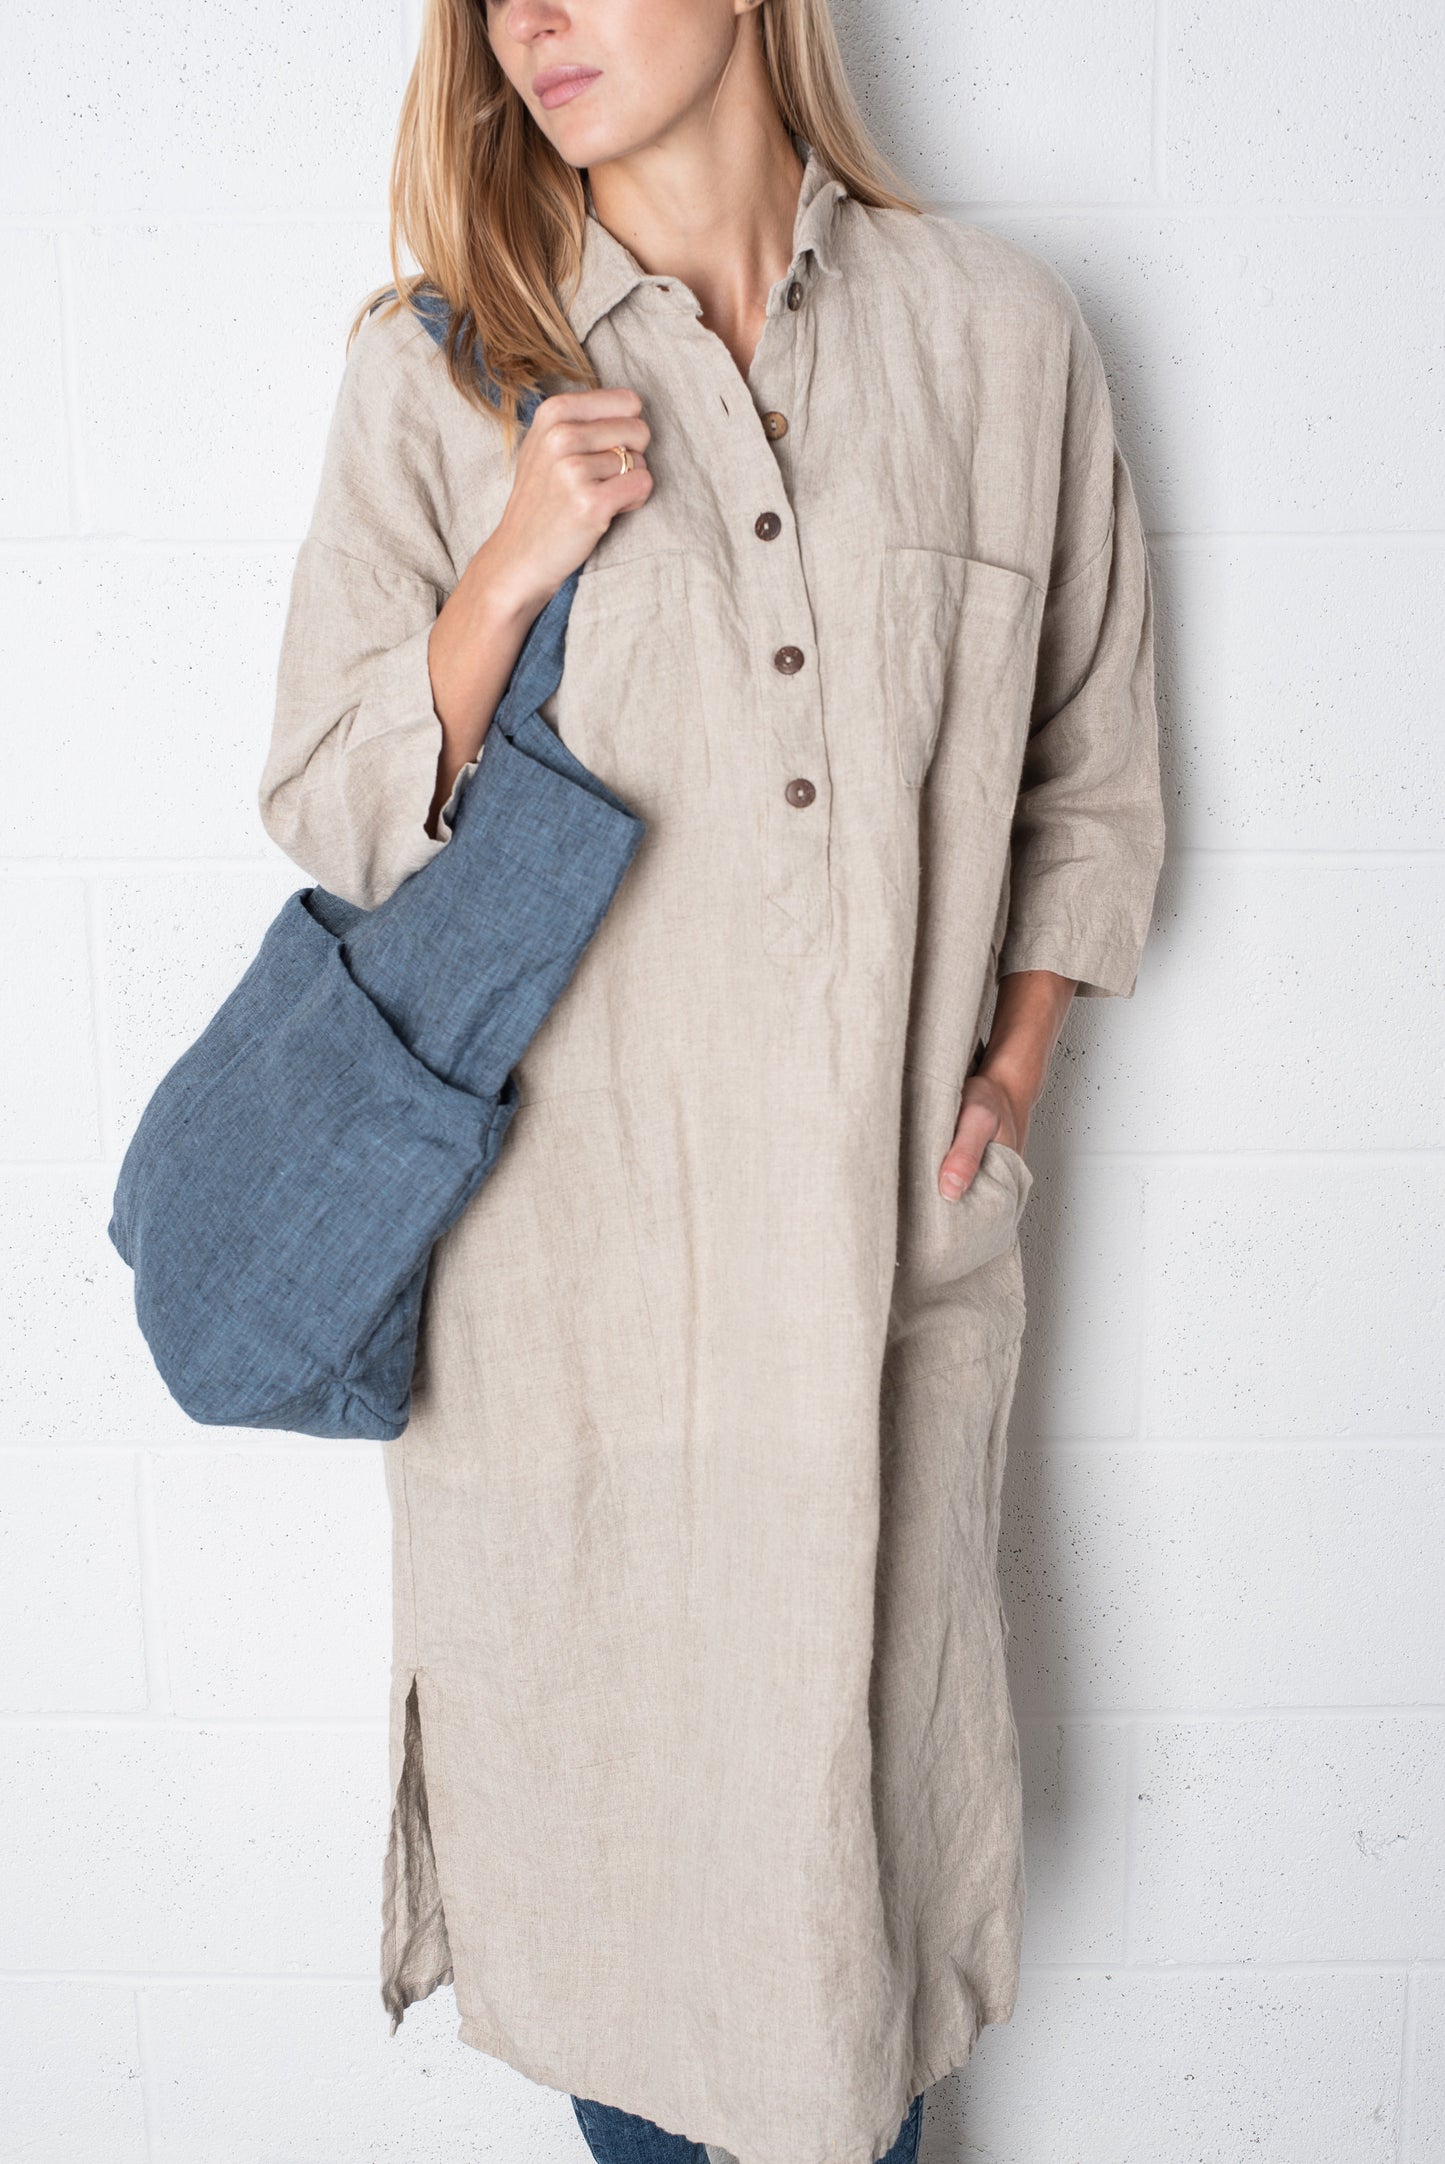 Close-up: Authentic texture and natural wrinkles of a medium-weight linen dress.